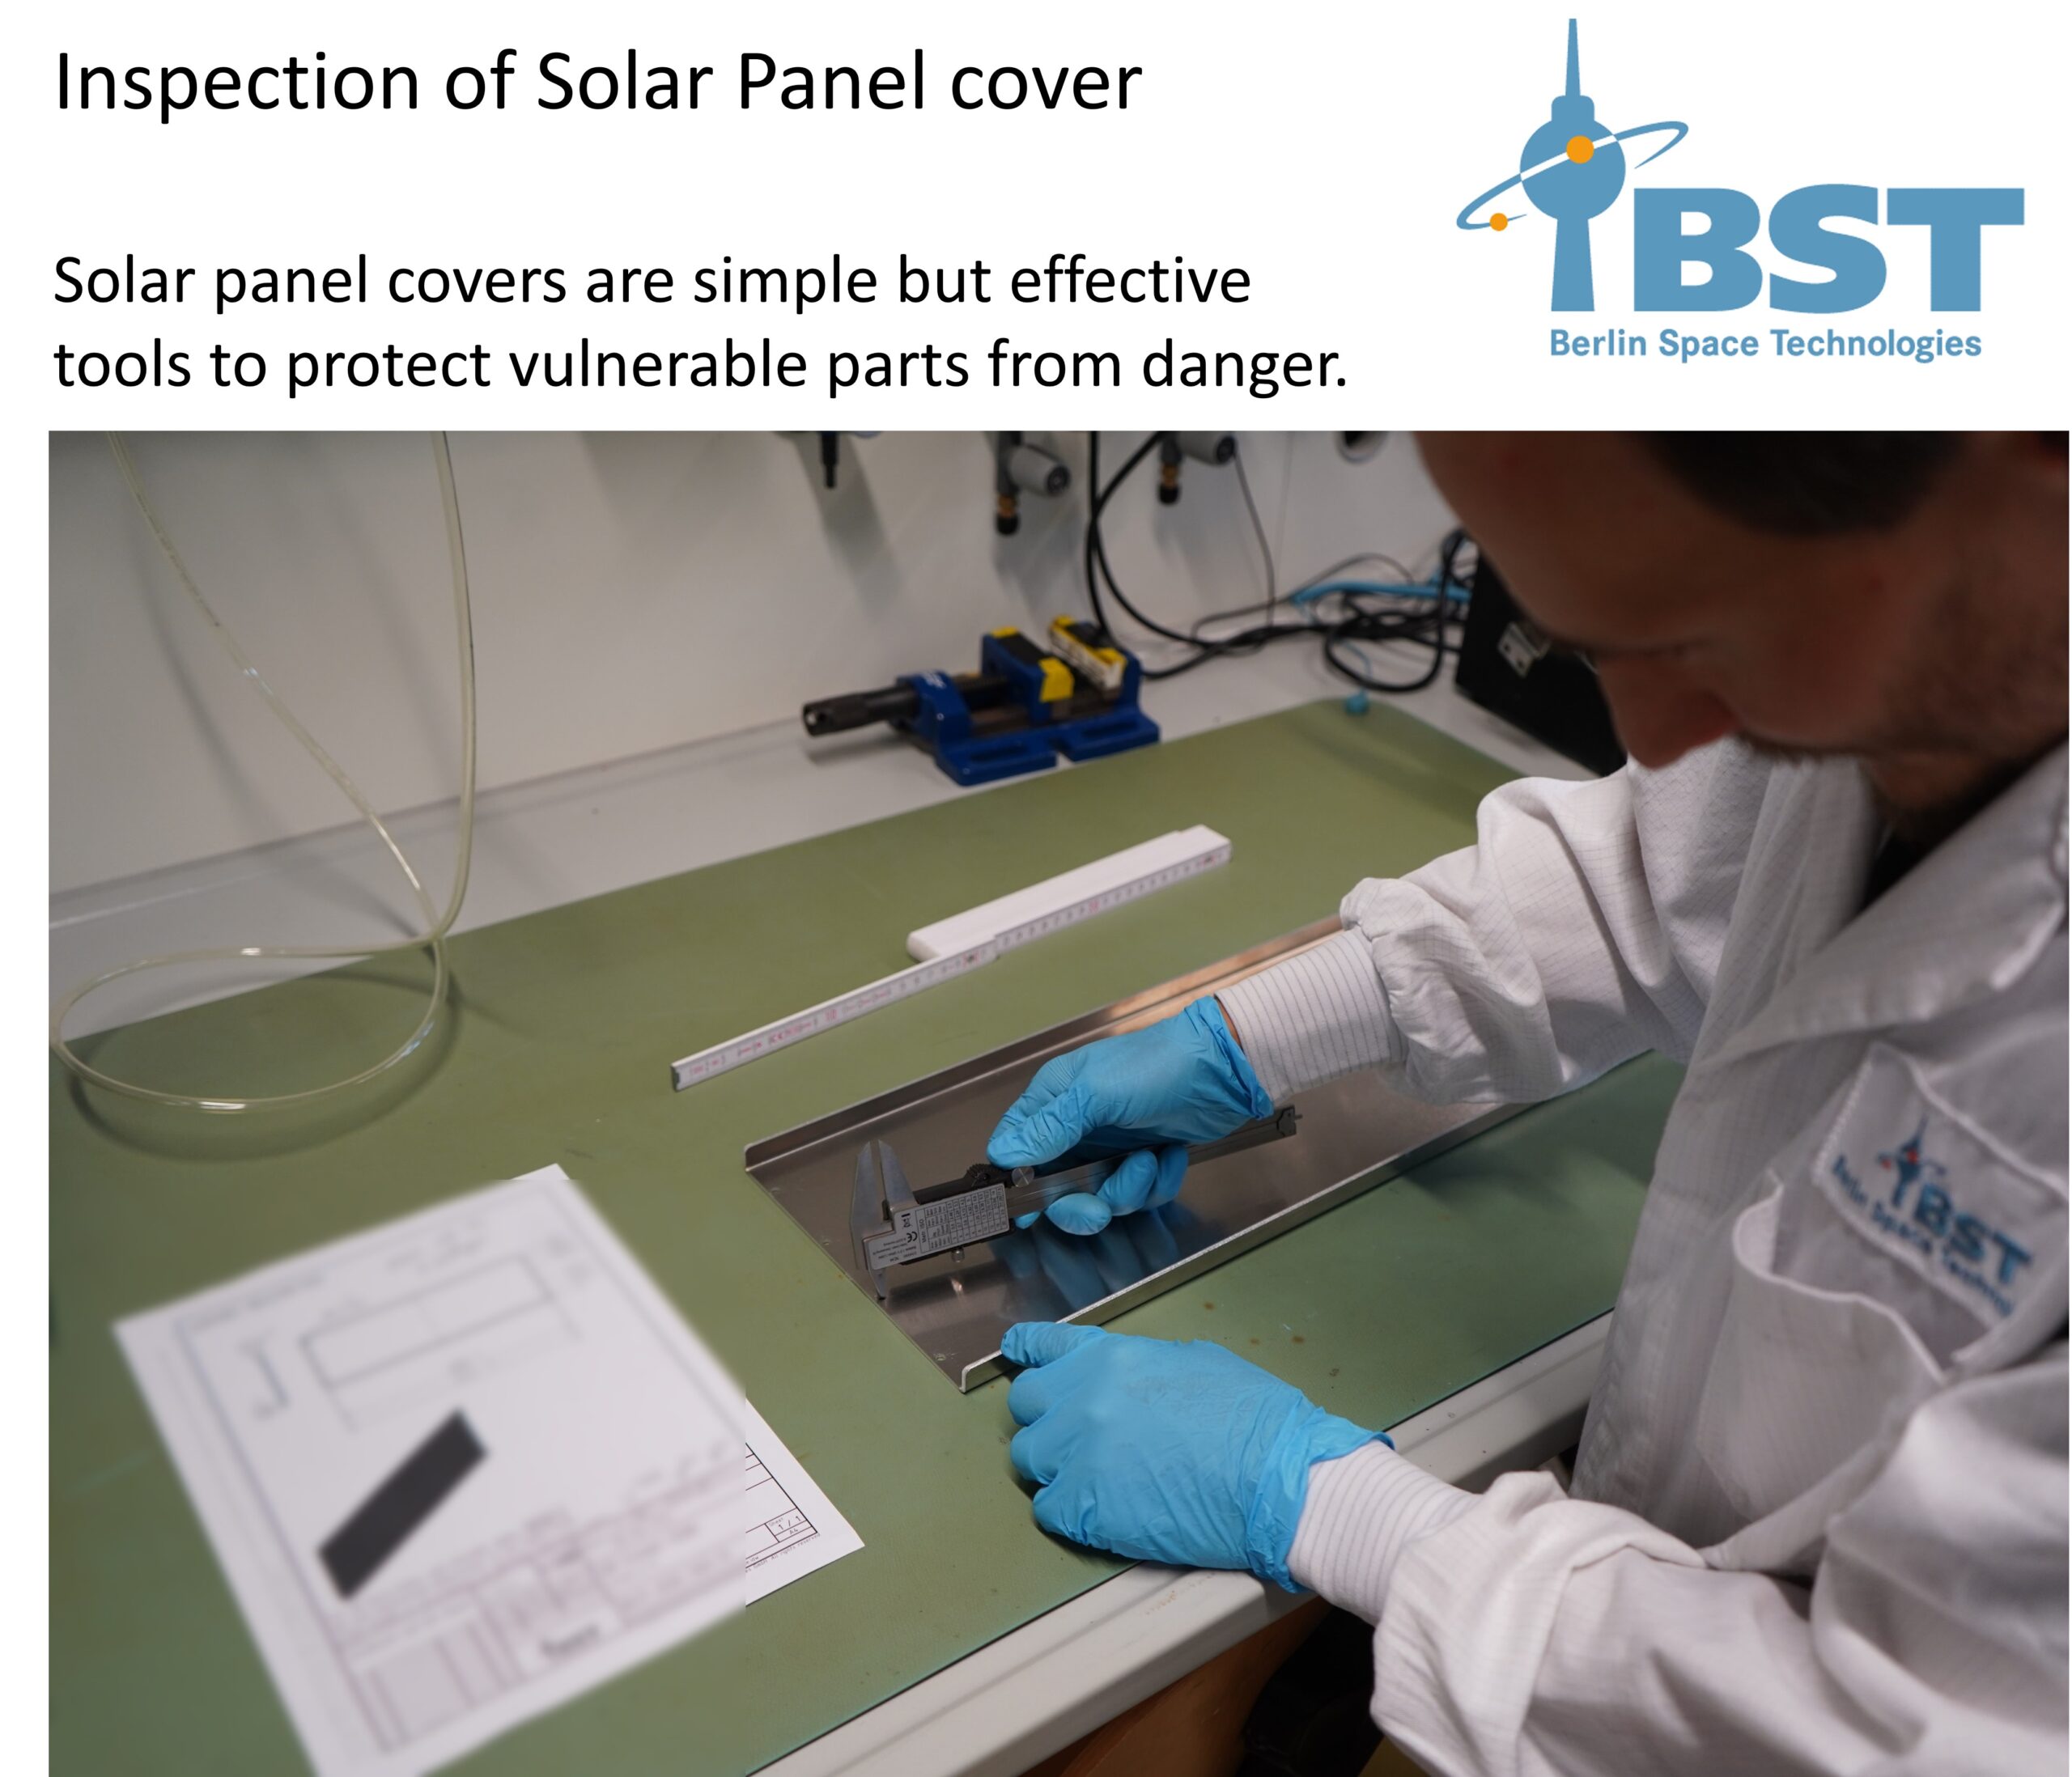 Inspection of Solar Panel Cover